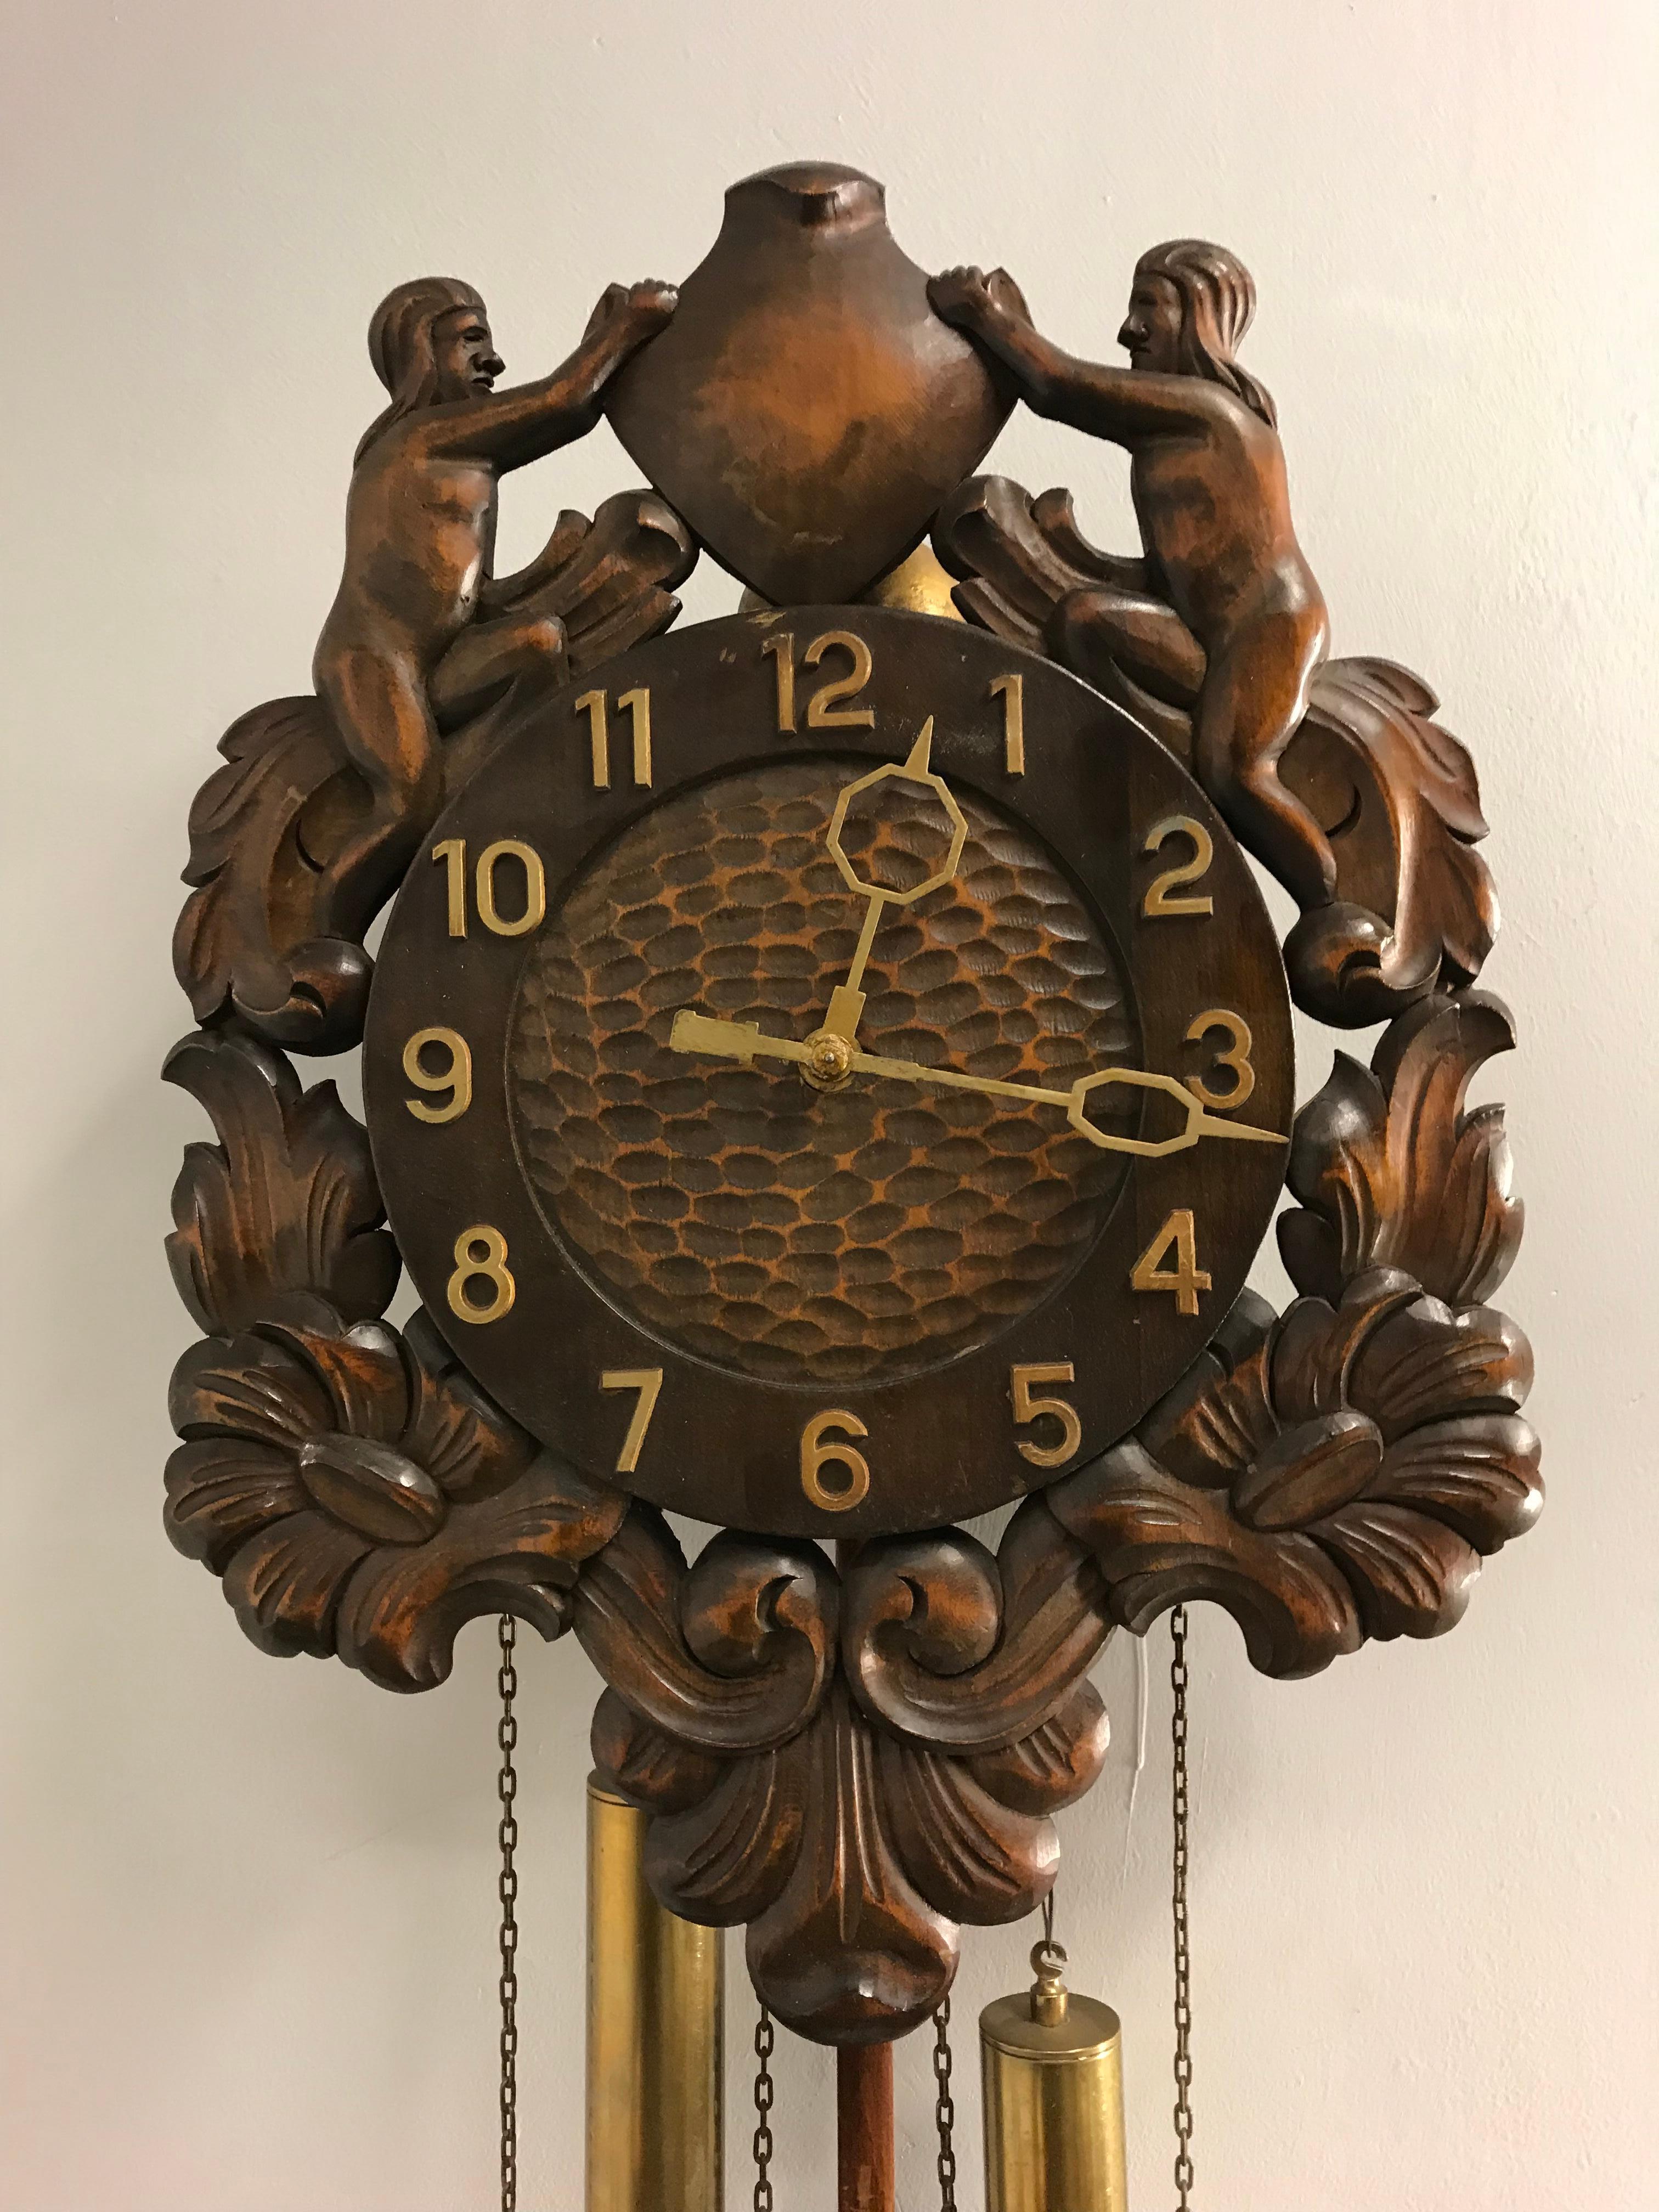 Tasteful and unique wooden wall clock with sculptural front.

The magnificent front of this midcentury era wall clock is entirely hand carved out of solid wood. It is difficult to see in a photo, but even the dial face is perfectly carved and a rare